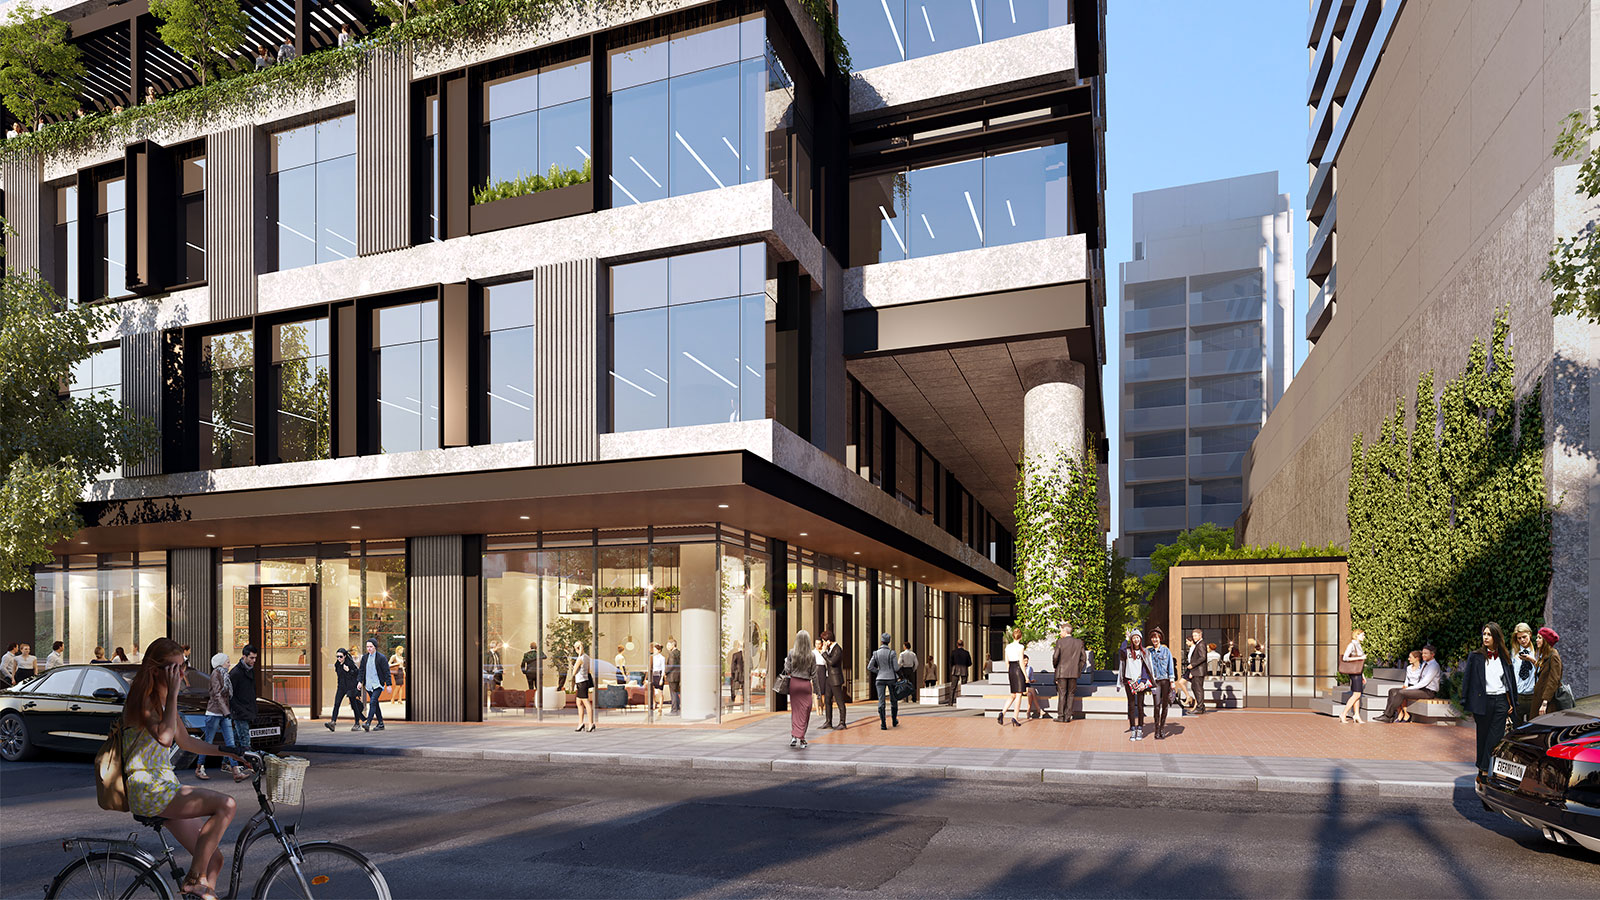 NSW Build-To-Rent Changes Win Sector Approval | The Urban Developer